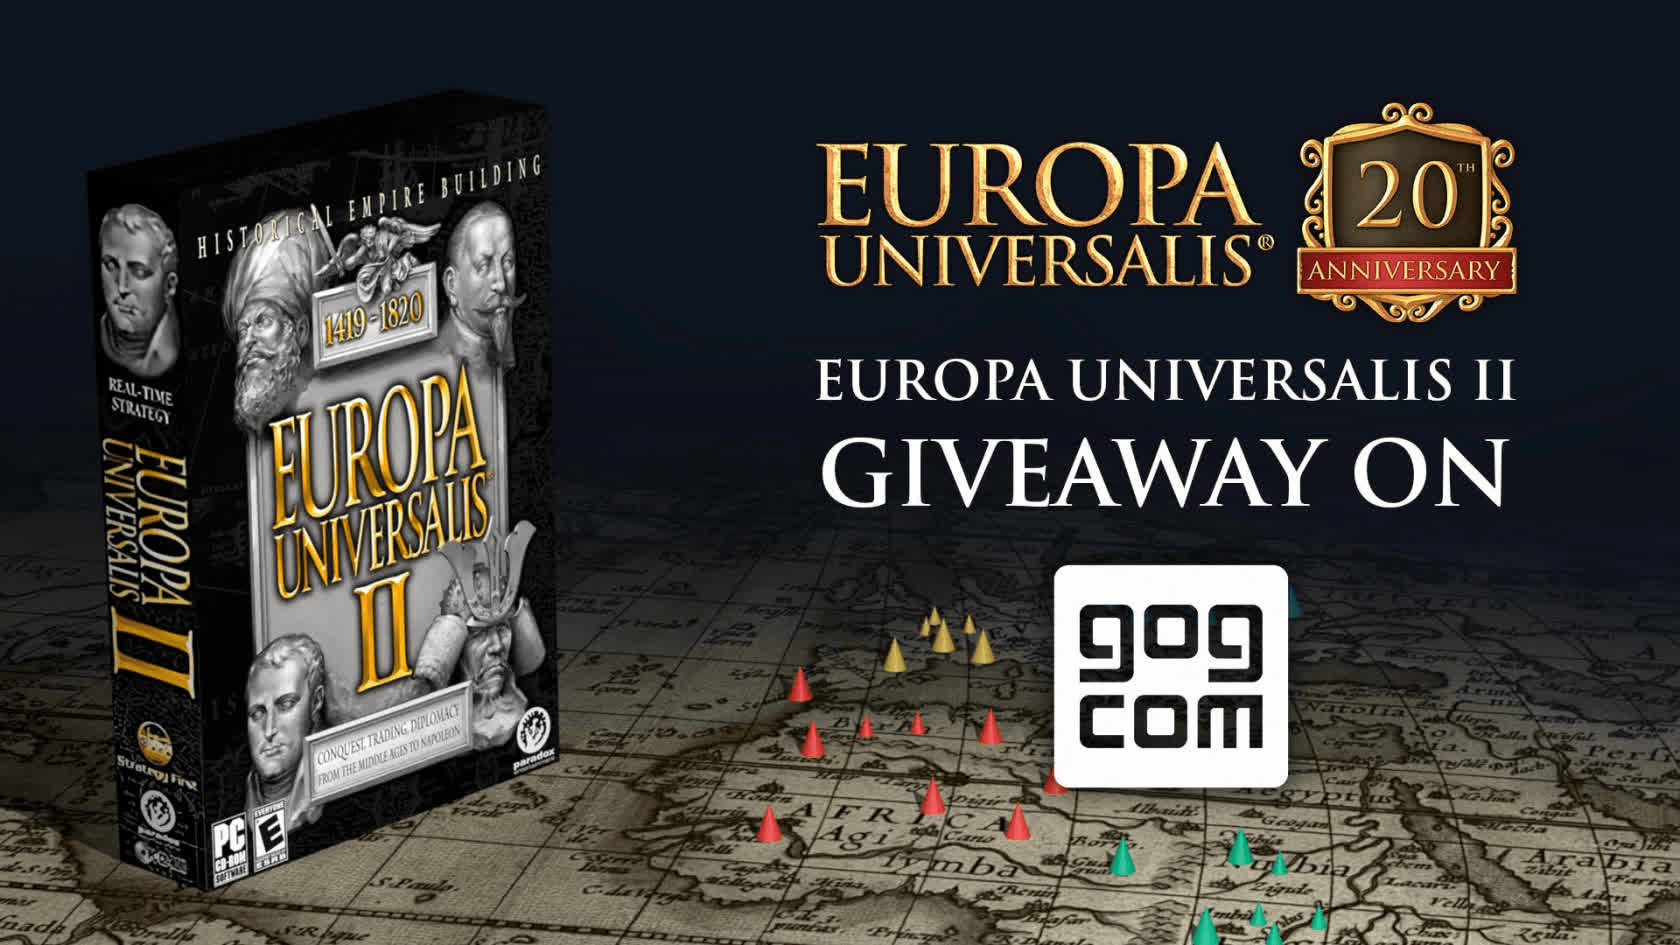 GOG gives away free copies of Europa Universalis 2 to celebrate the series' 20th anniversary